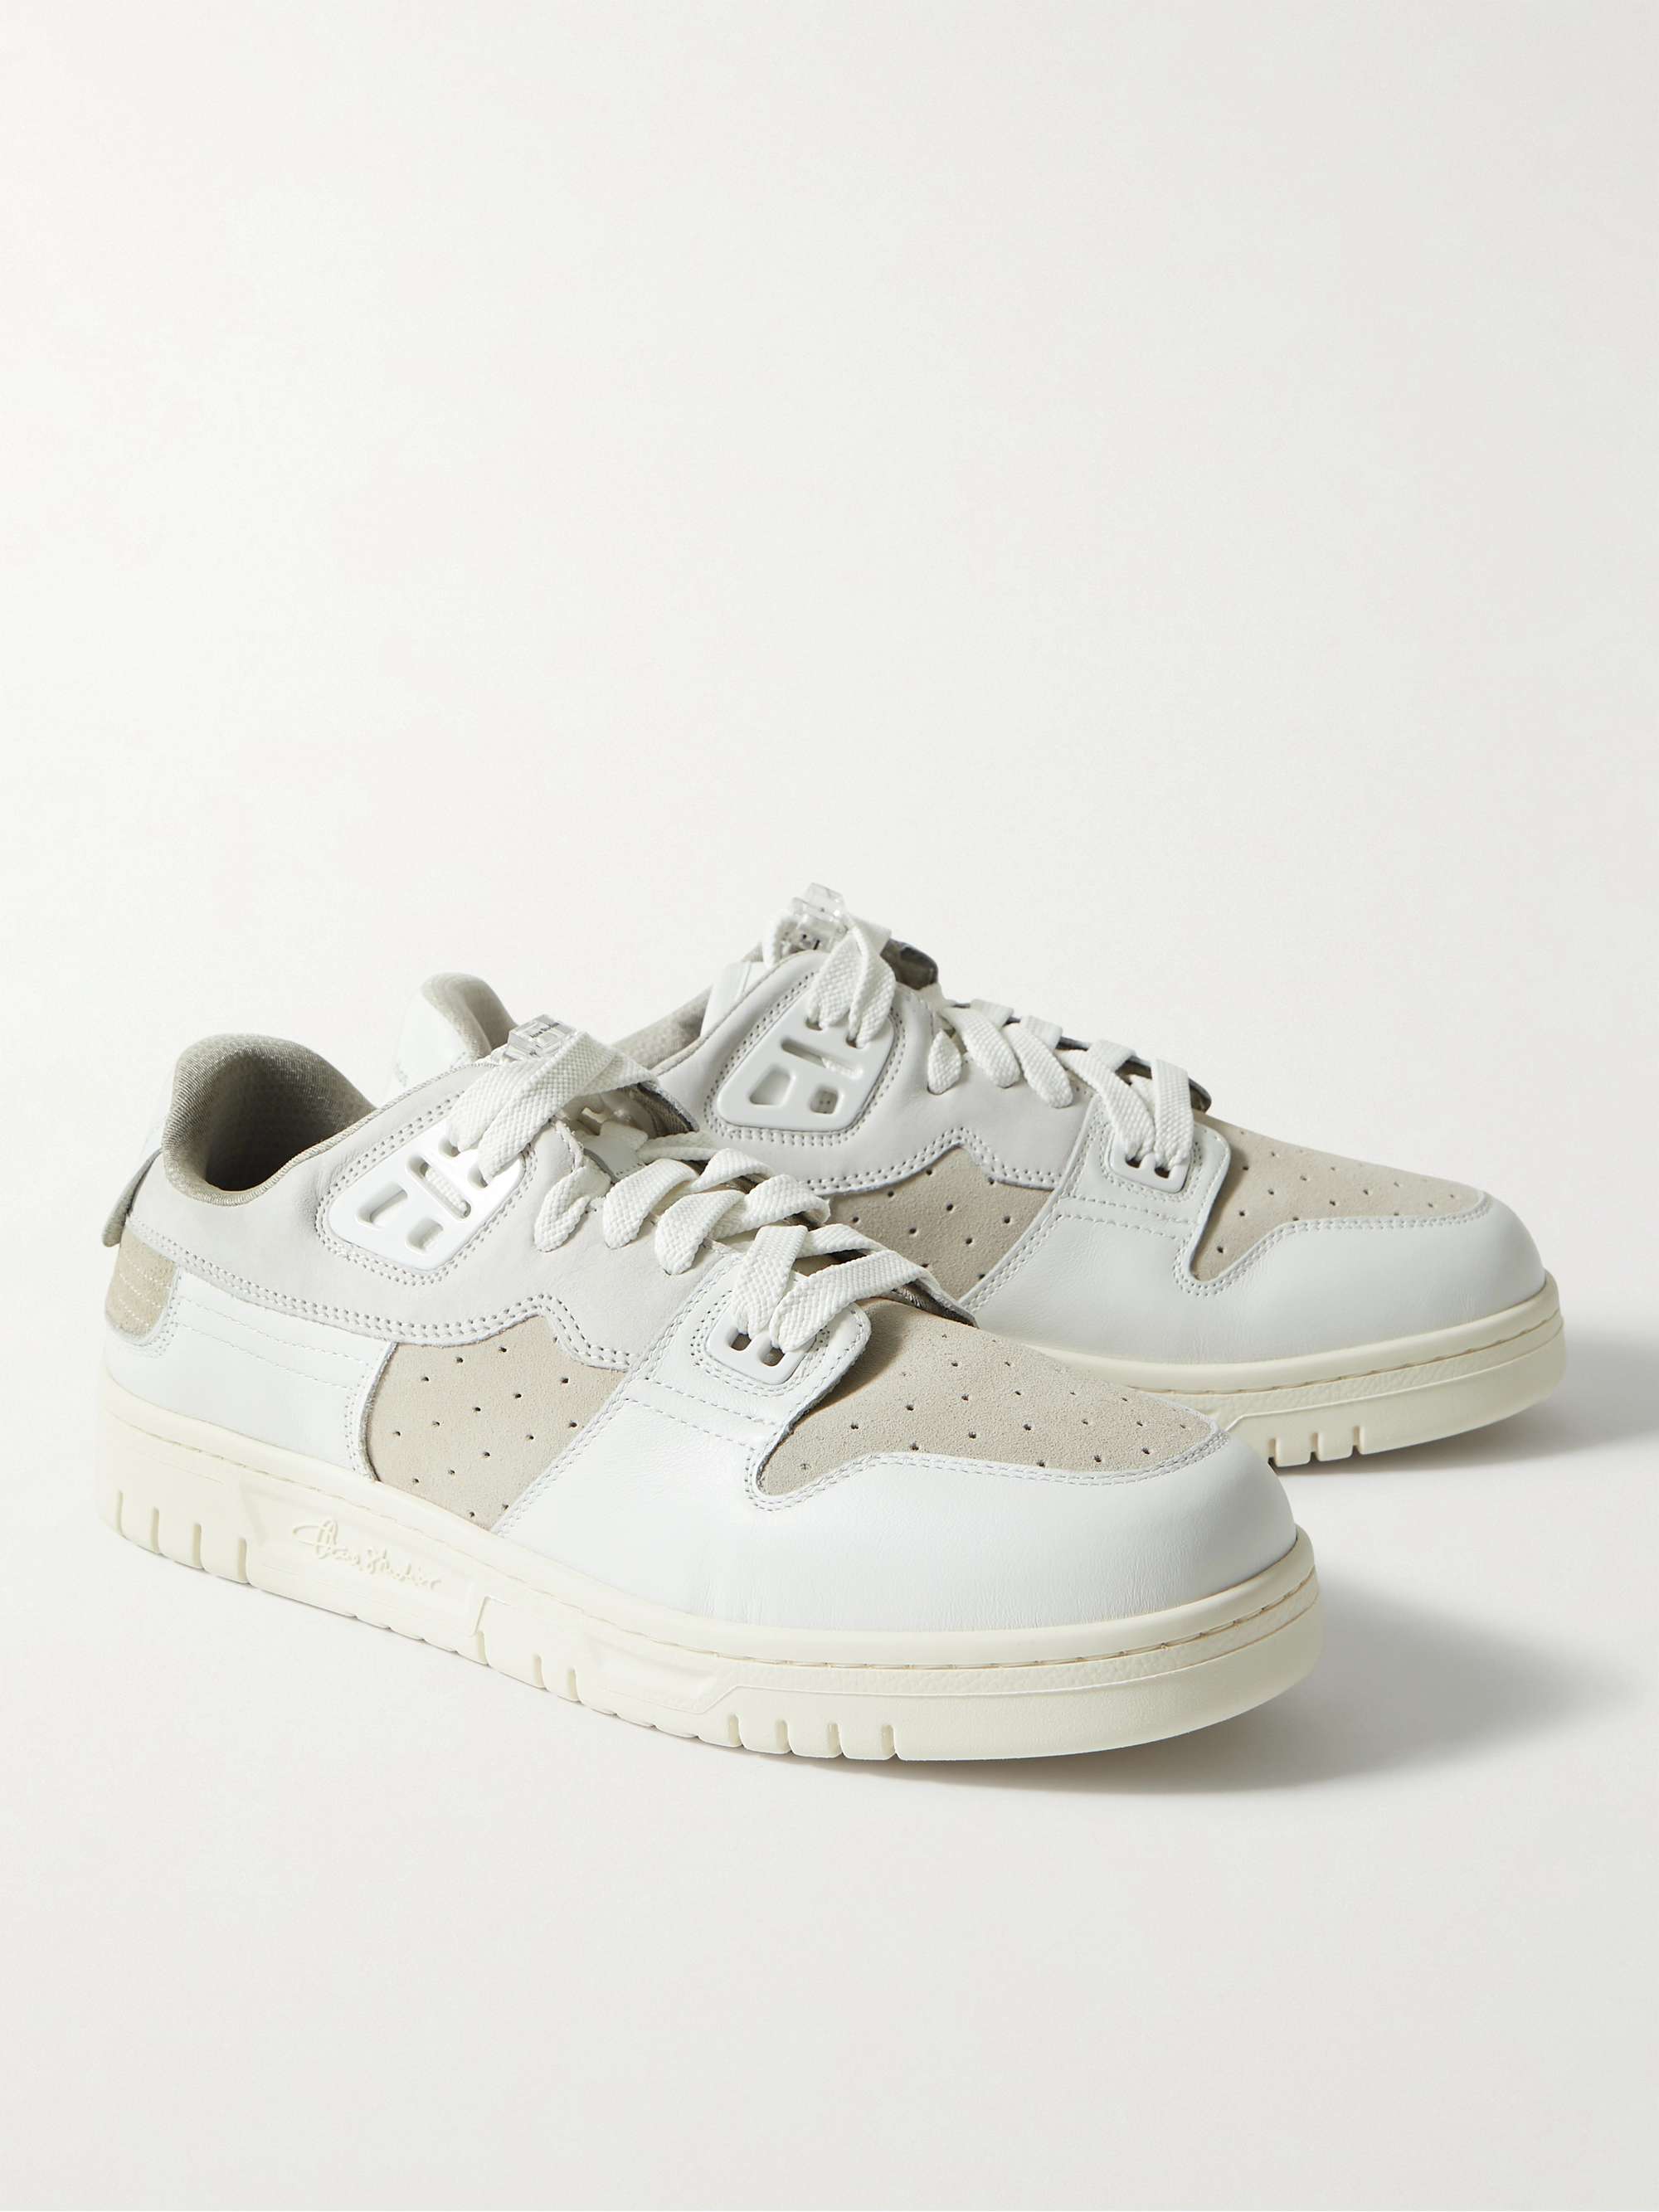 ACNE STUDIOS Suede, Nubuck and Leather Sneakers